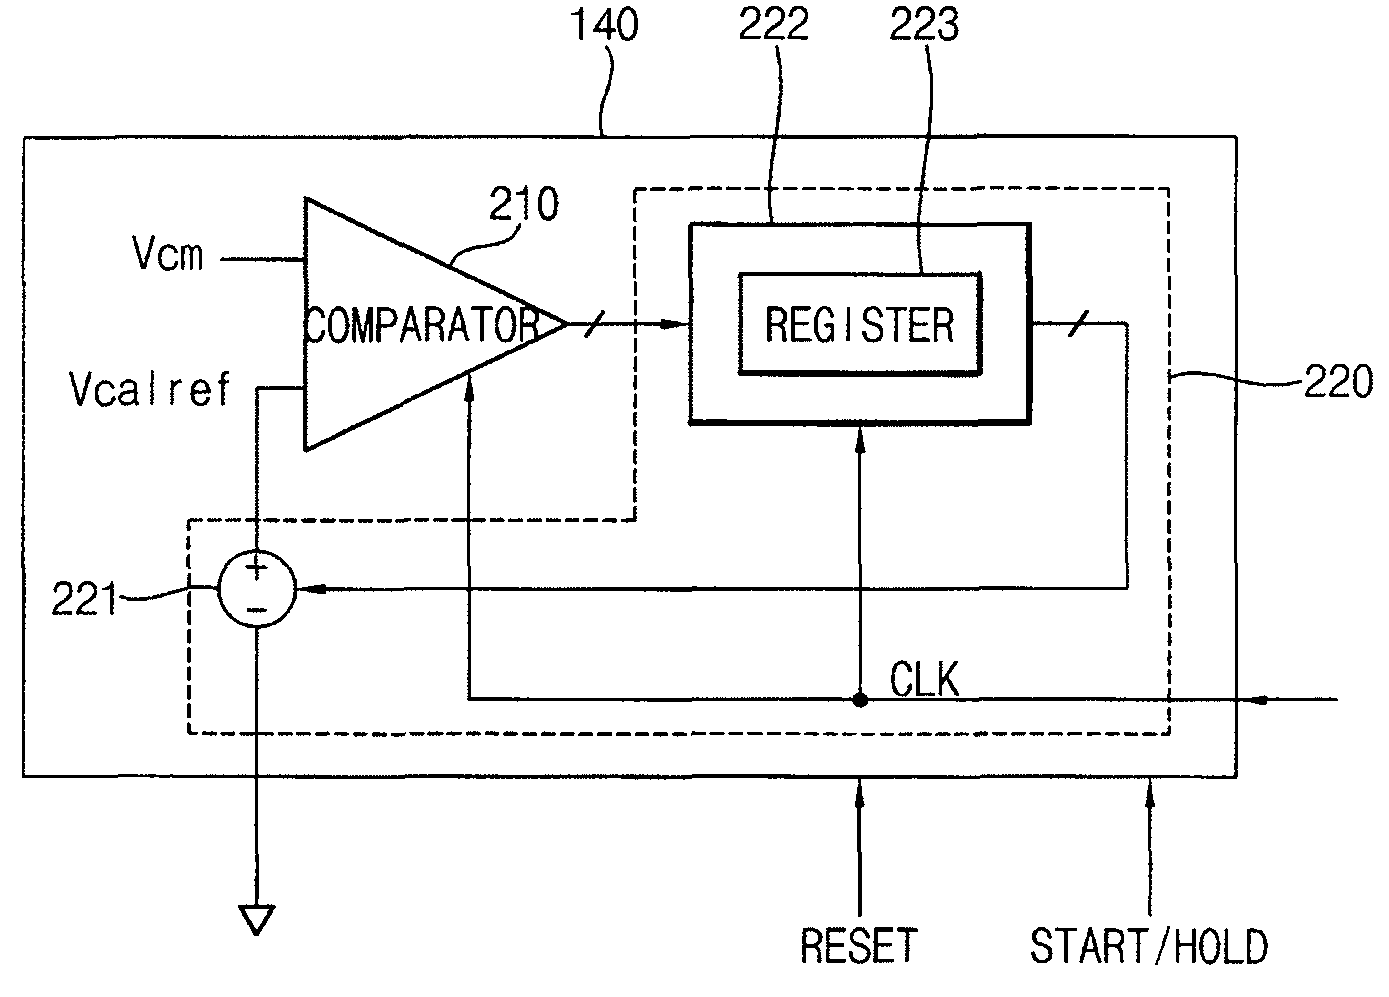 Second intercept point (IP2) calibrator and method for calibrating IP2